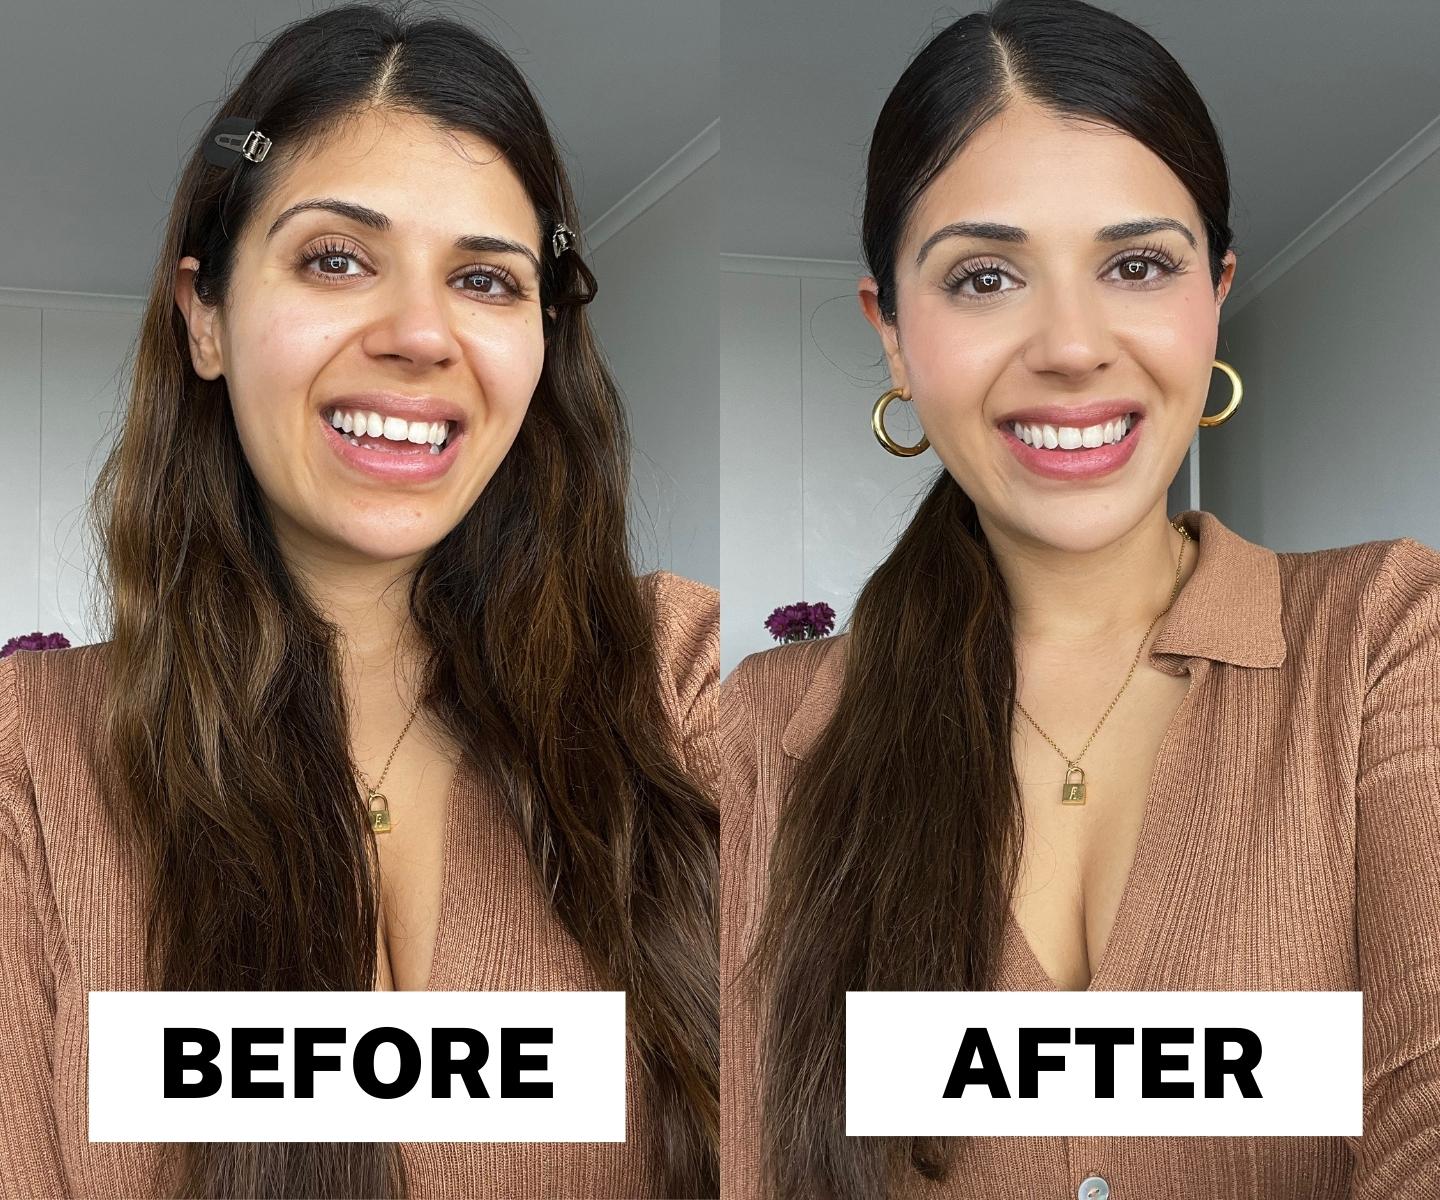 Clean Girl Makeup Before and After